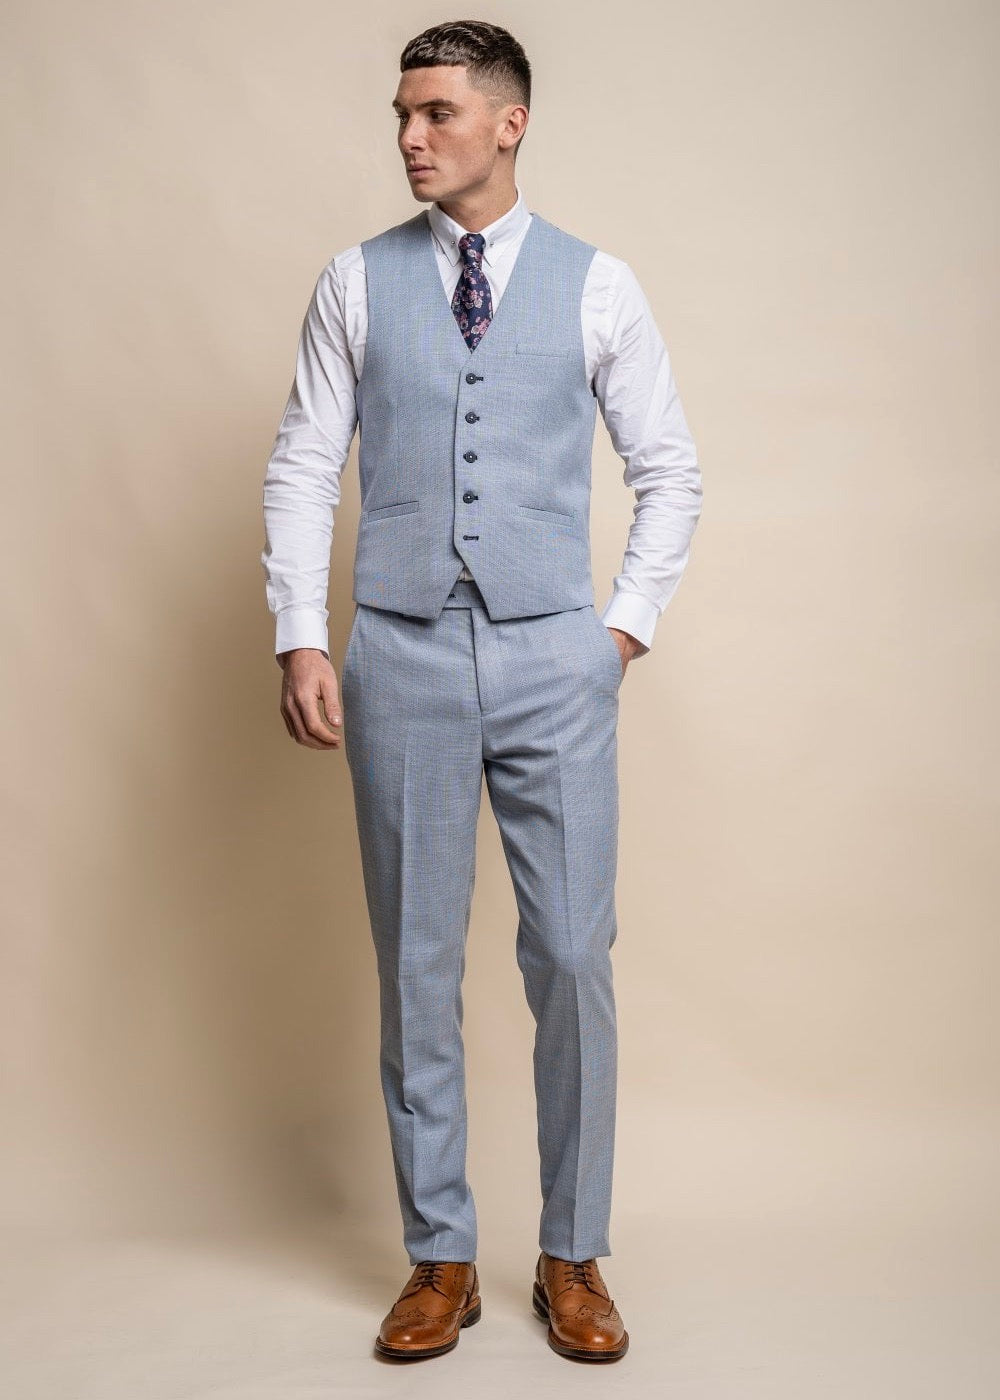 Maimi sky suit for men, waistcoat is shown with trousers and white shirt.